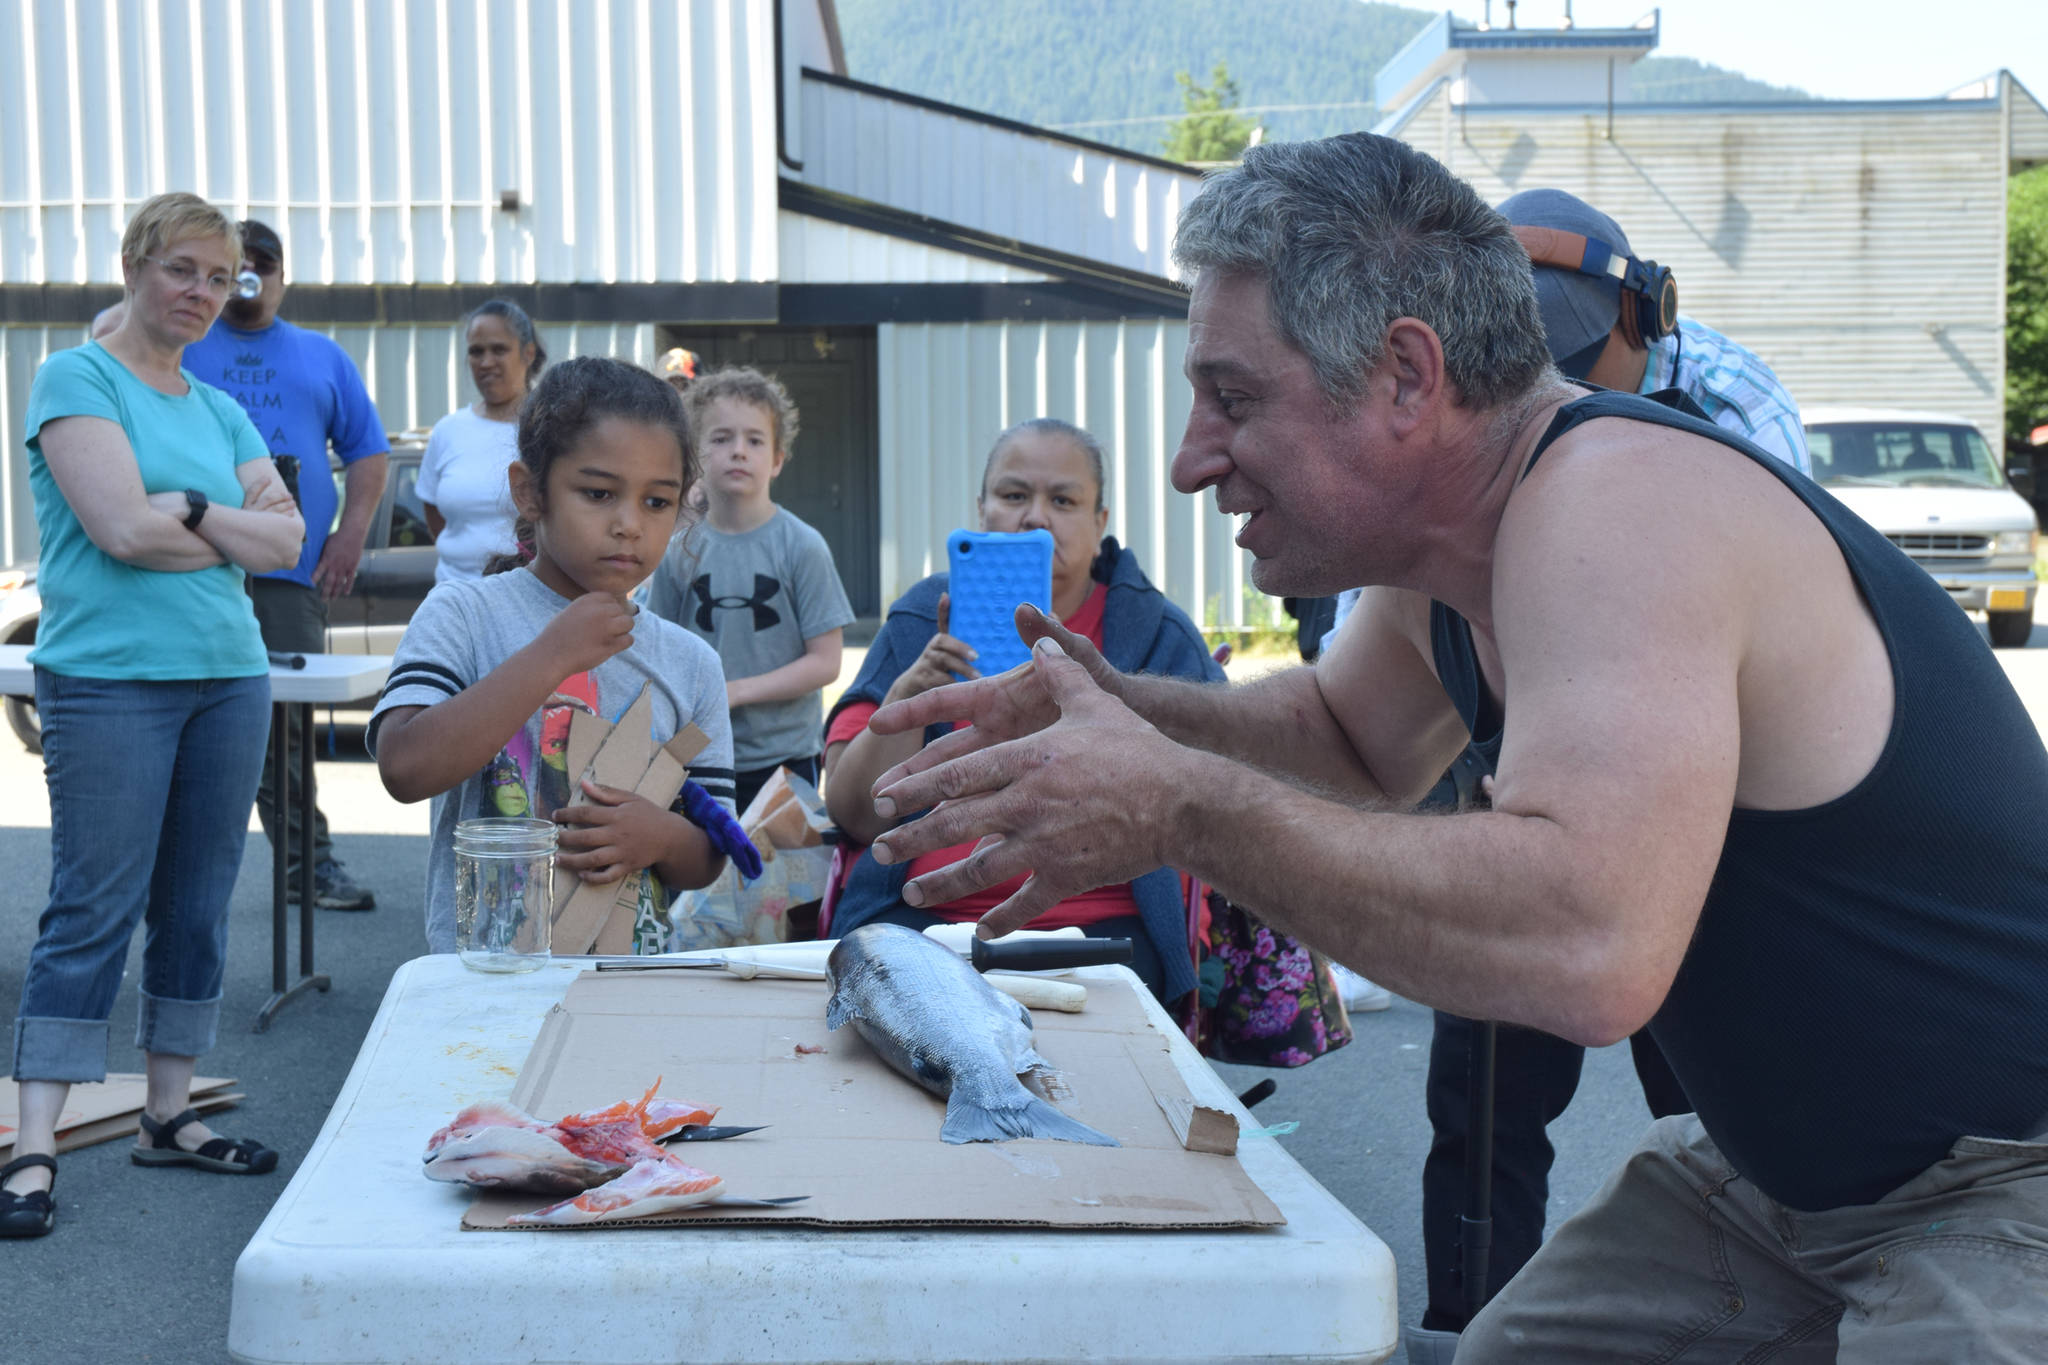 Cultural specialist John Smith tells stories about salmon while processing fish during a salmon preservation workshop on Saturday, July 21, 2018. (Kevin Gullufsen | Juneau Empire)